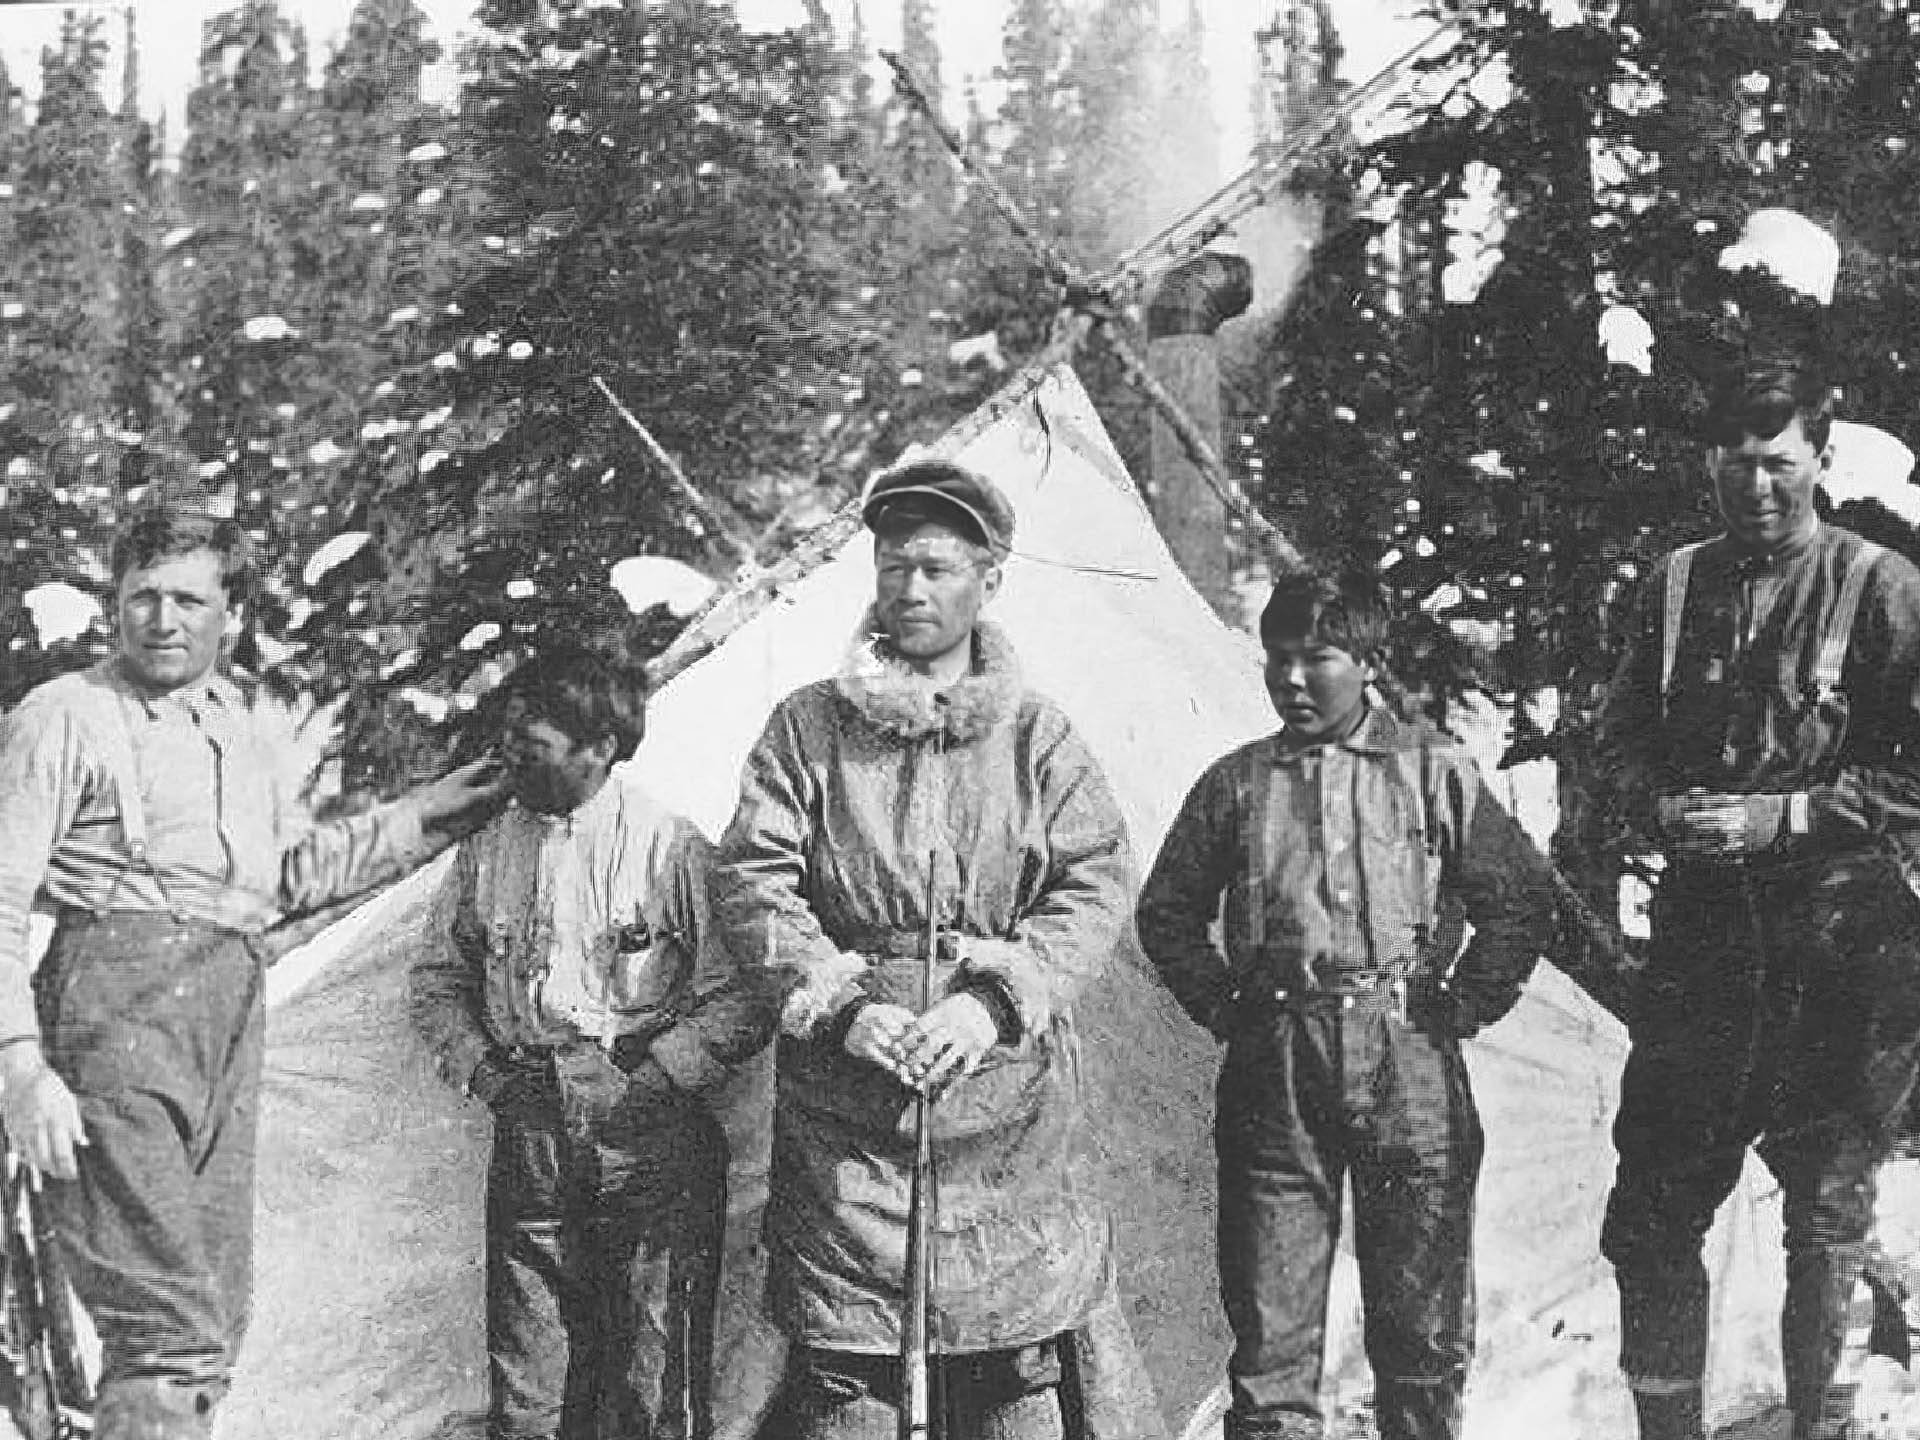 Robert Tatum, Esaias George, Harry Karstens, Johnny Fredson and Walter Harper at the Clearwater Camp (Photo: NPS)